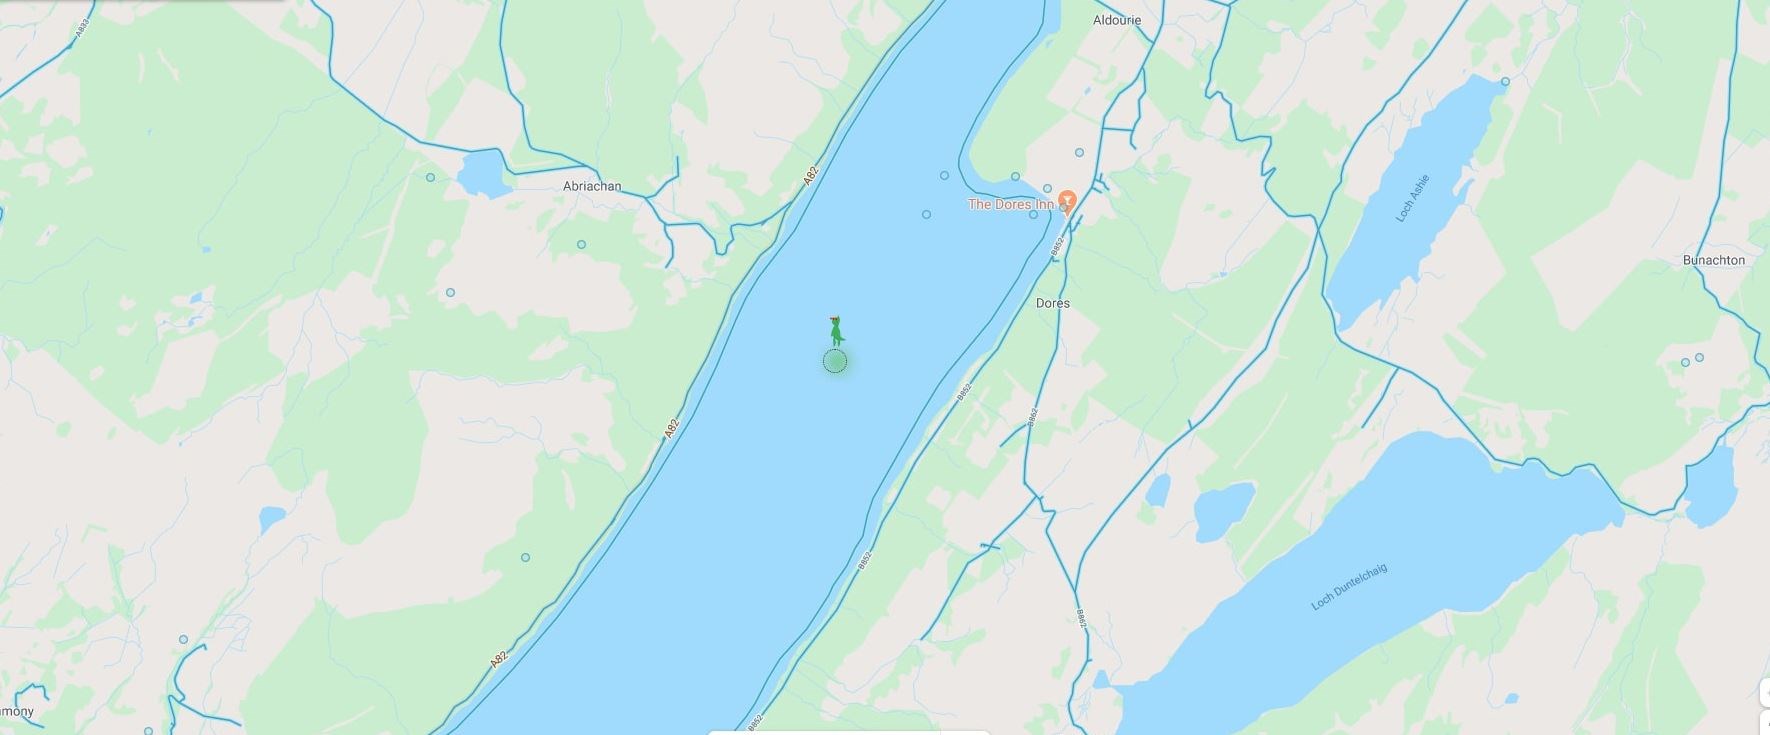 Nessie can be seen on Google Maps when you zoom in anywhere near Loch Ness.